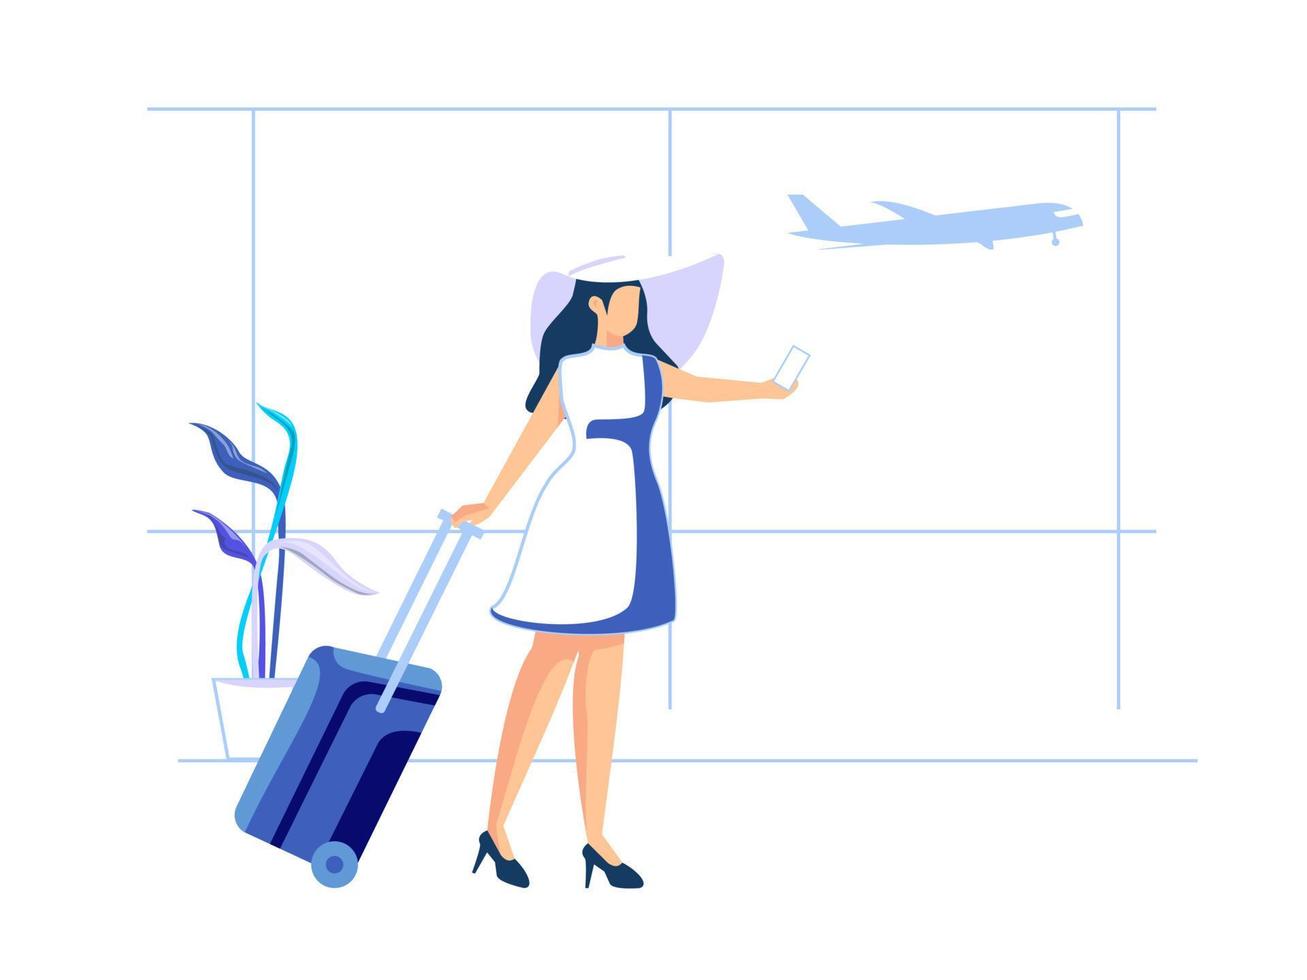 Women enjoy vacations and adventures by taking pictures. Female character concept in flat style. Vector illustration.